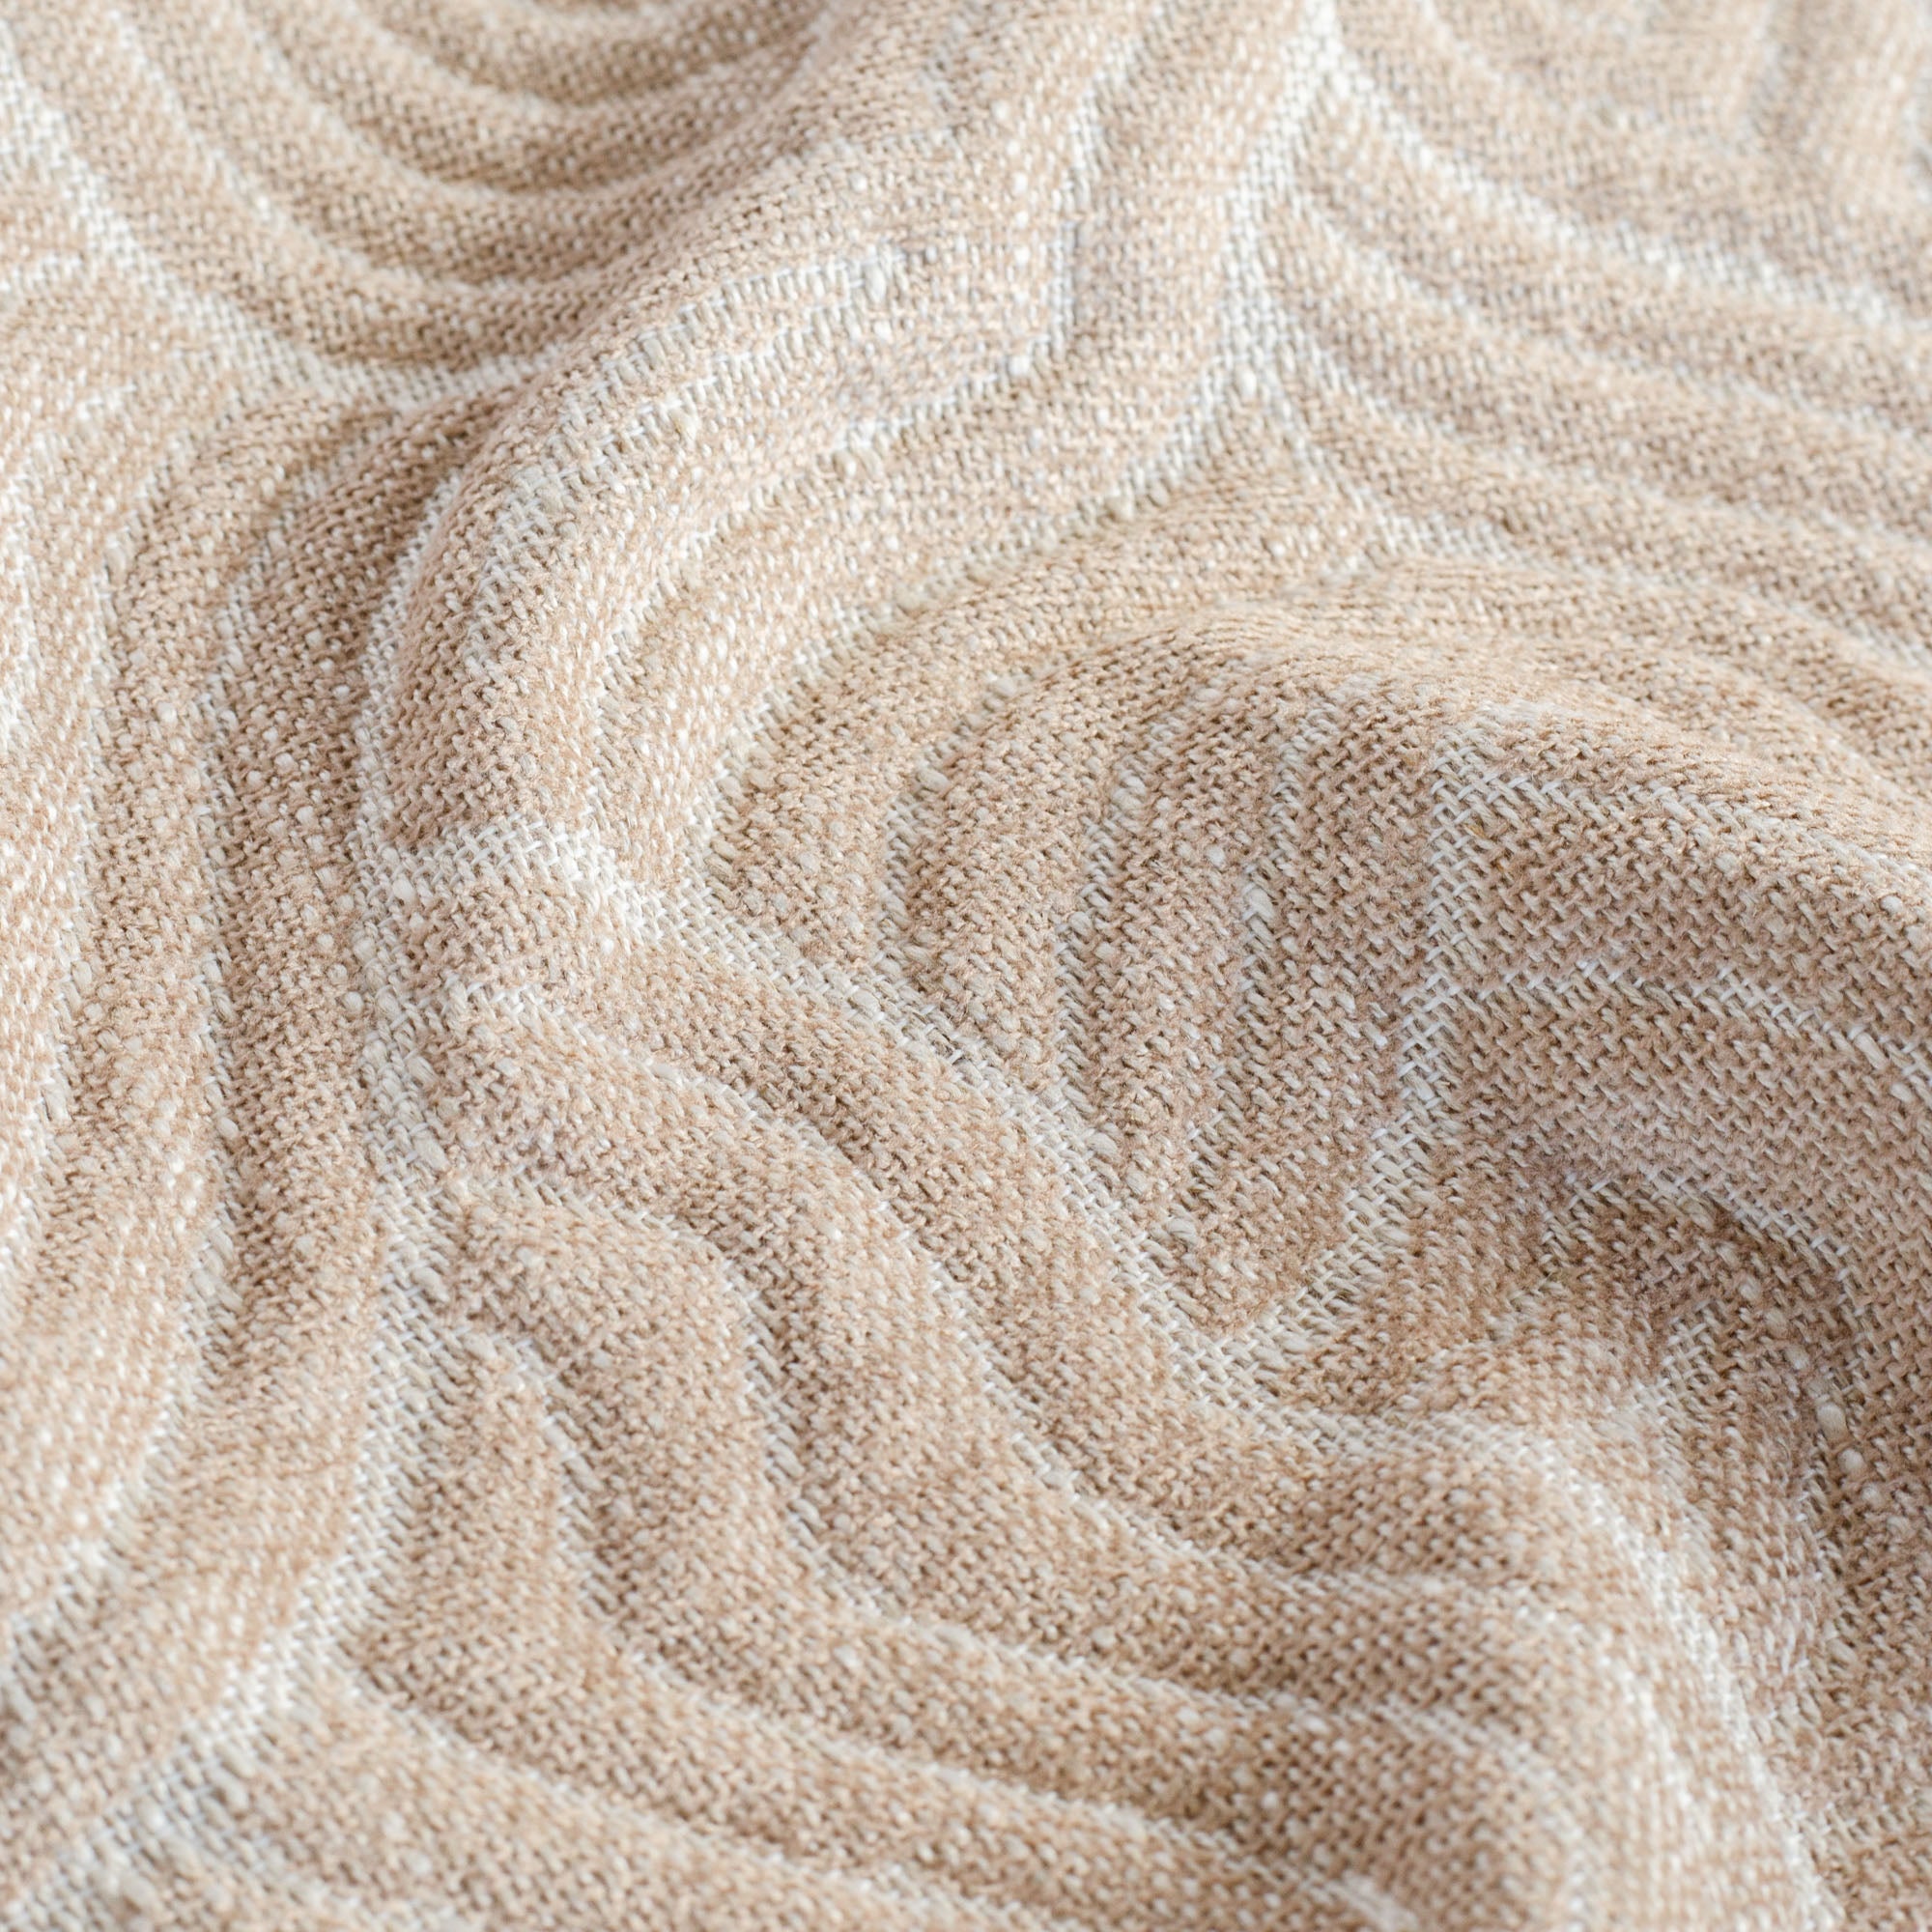 a light pink abstract quilted patterned home decor fabric : close up view